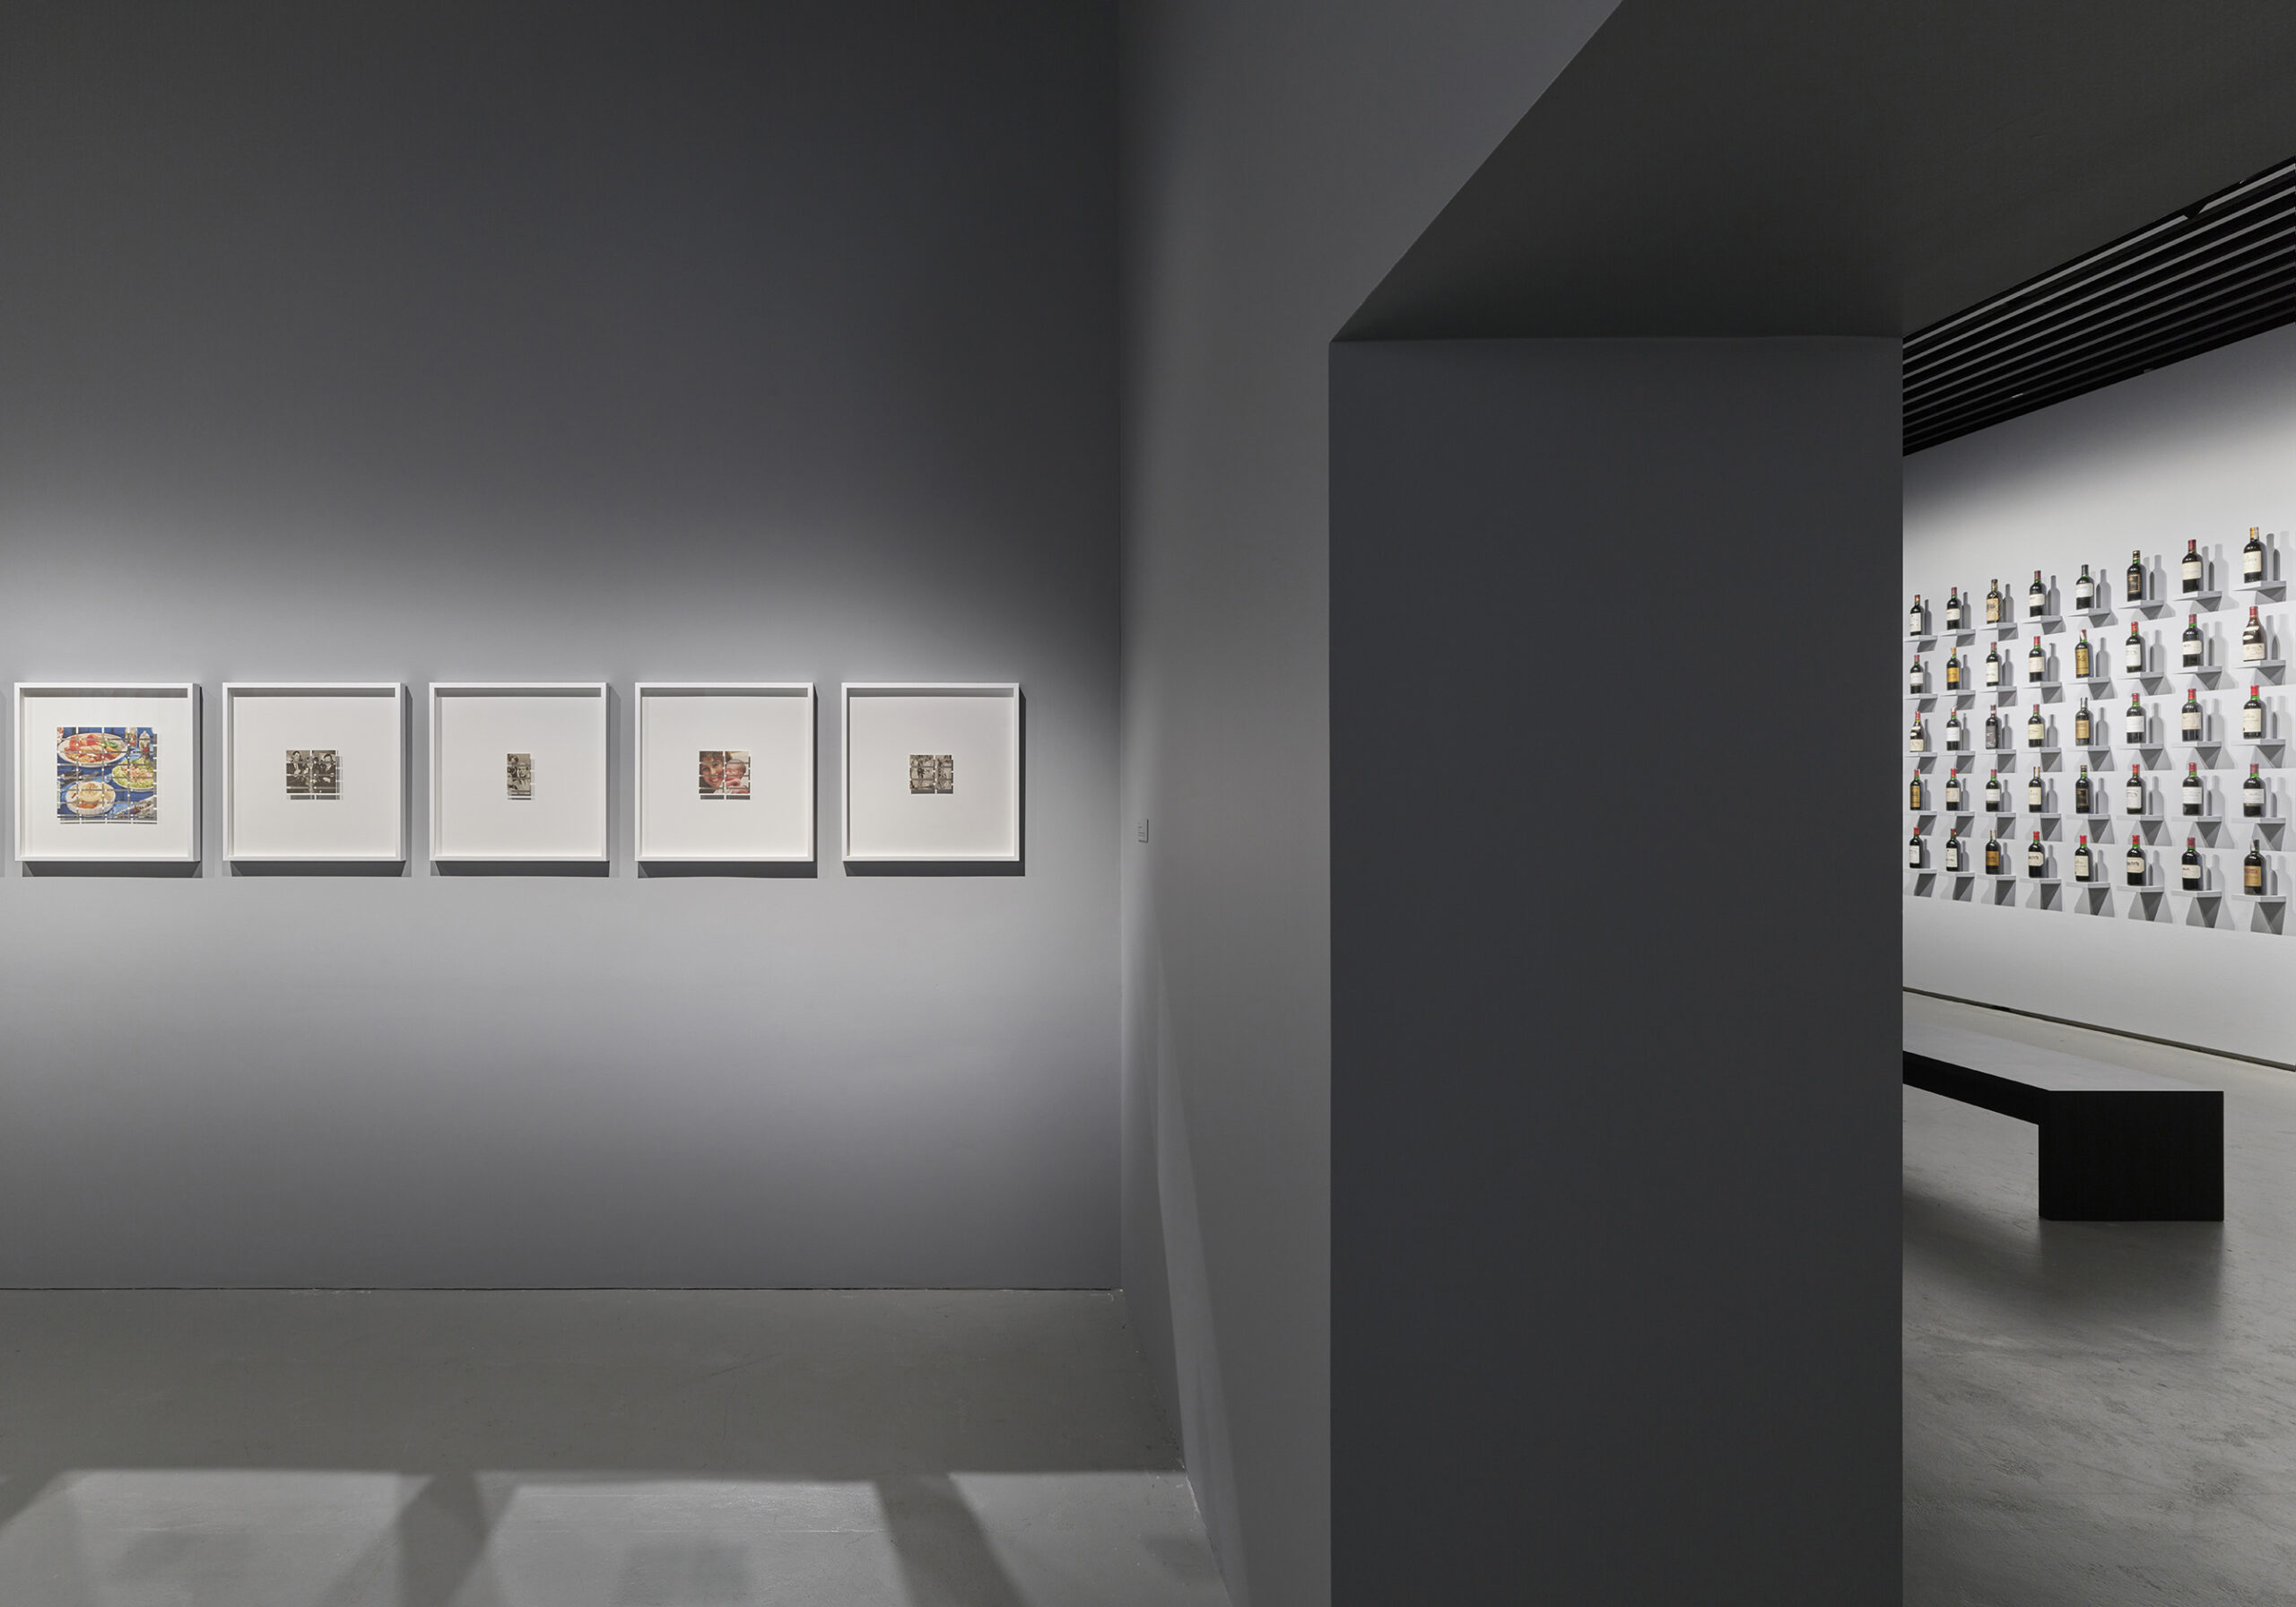 Installation view from the duo exhibition with Per Bak Jensen TWO ROOMS, 2023, The National Museum of Photography, Copenhagen (DK)